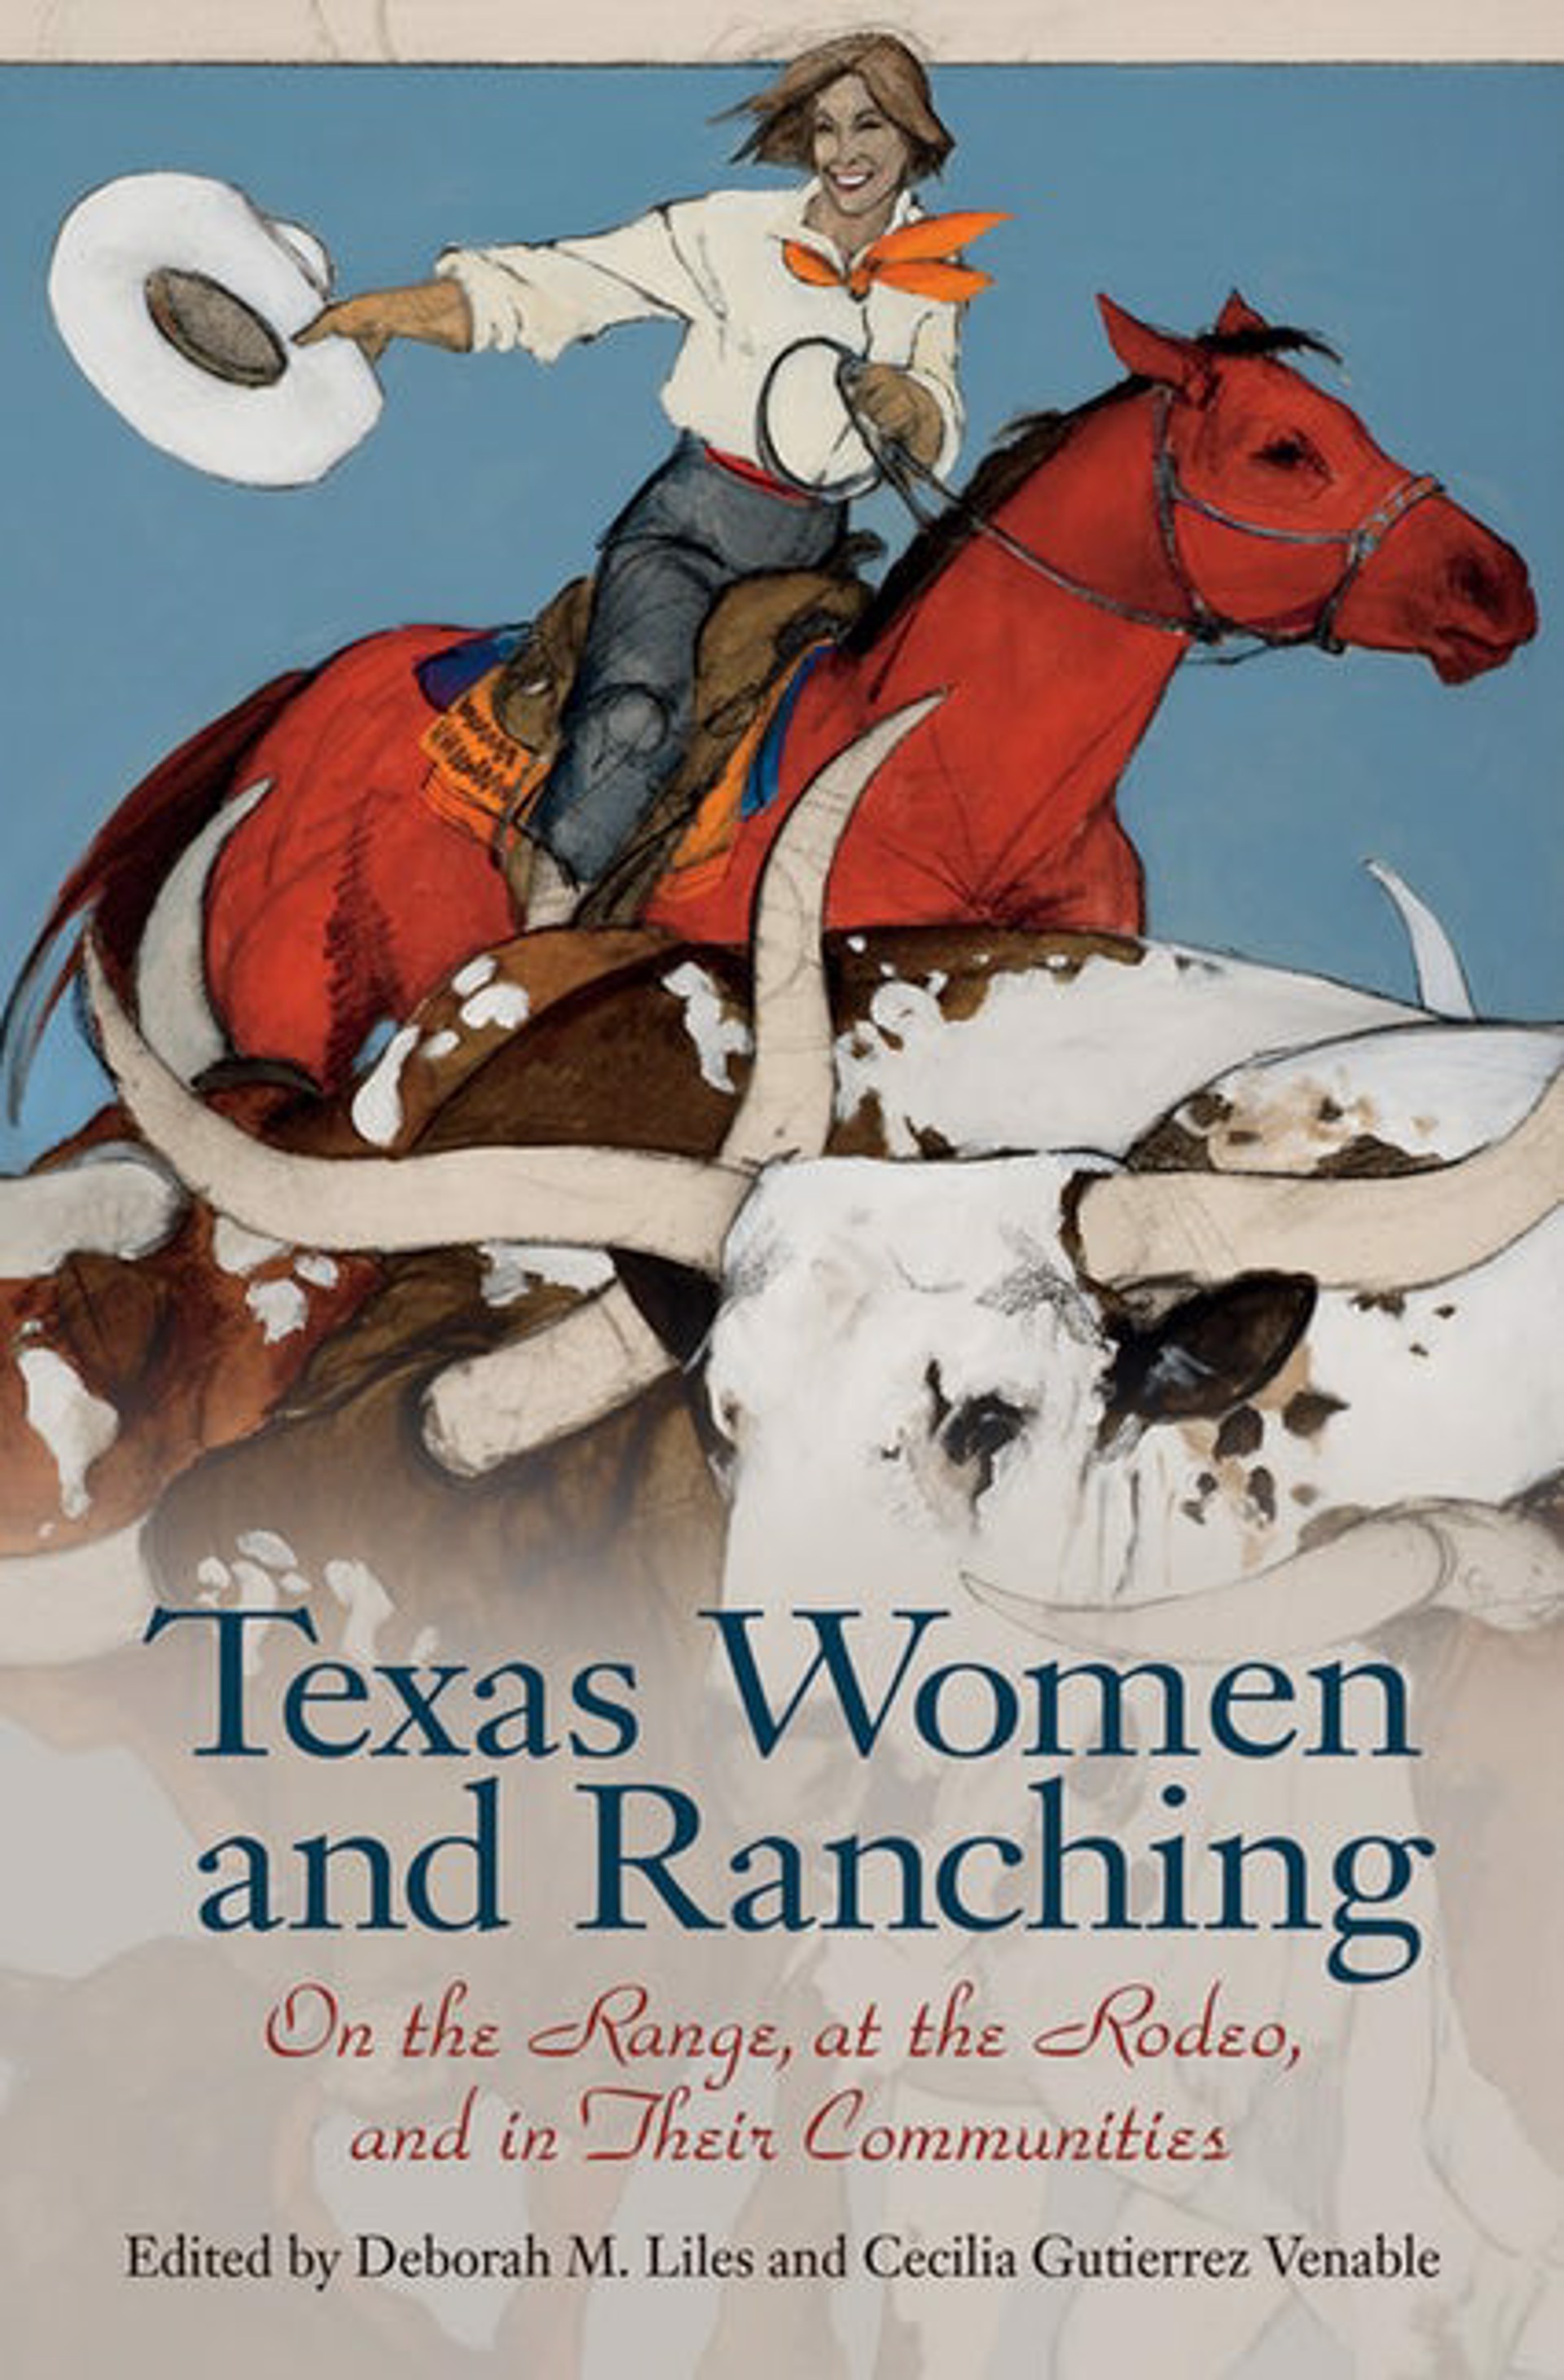 Texas Women and Ranching: On the Range, at the Rodeo, and in Their Communities by Publications